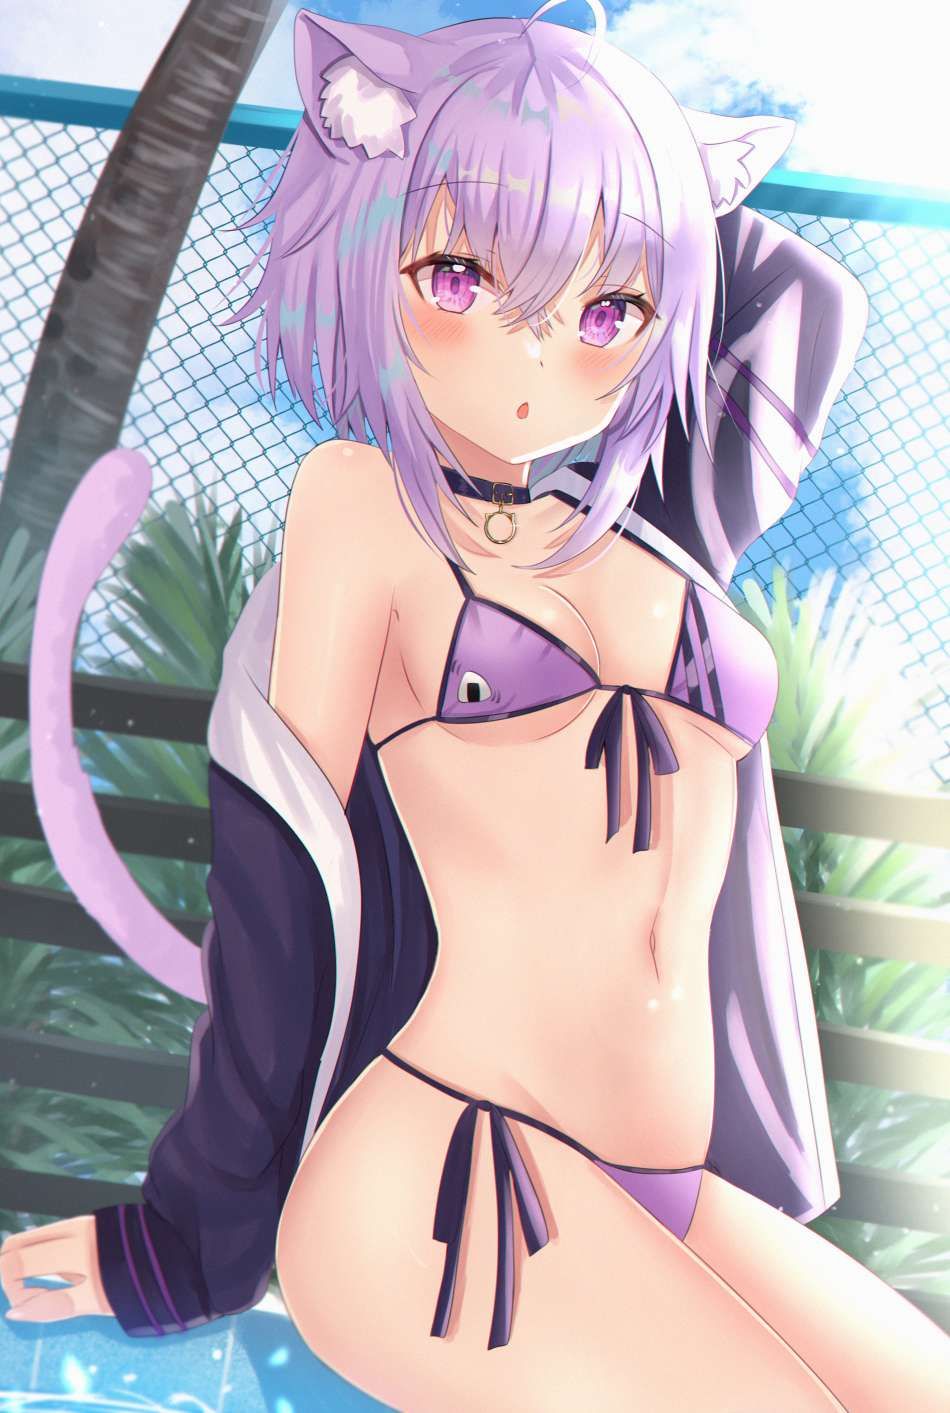 I want to give a shot in a swimsuit 4